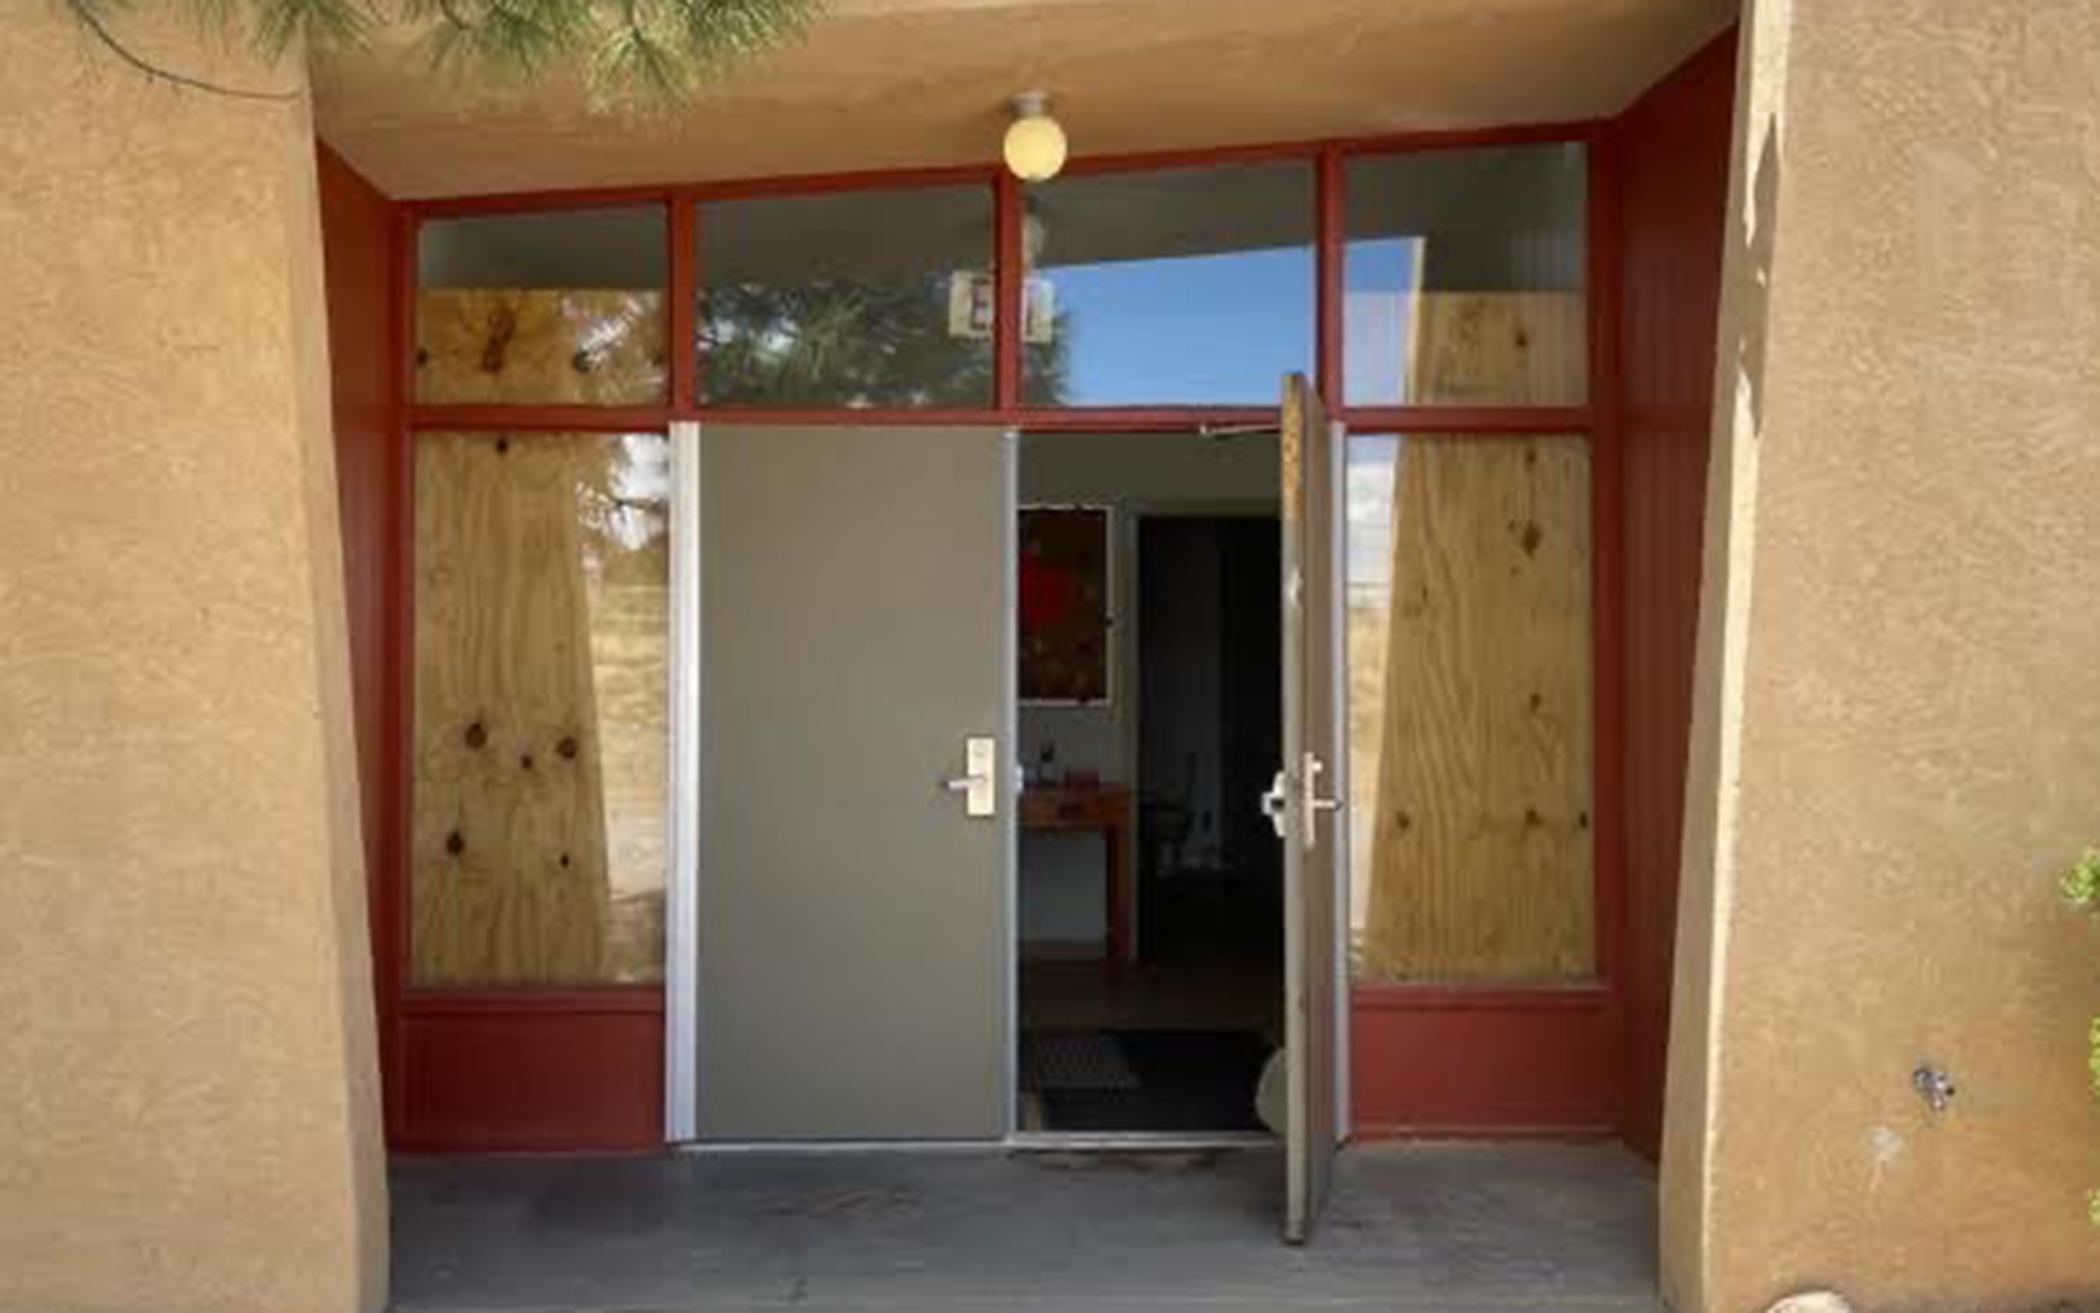 The front entrance of Crownpoint (N.M.) CRC was damaged in a break-in.